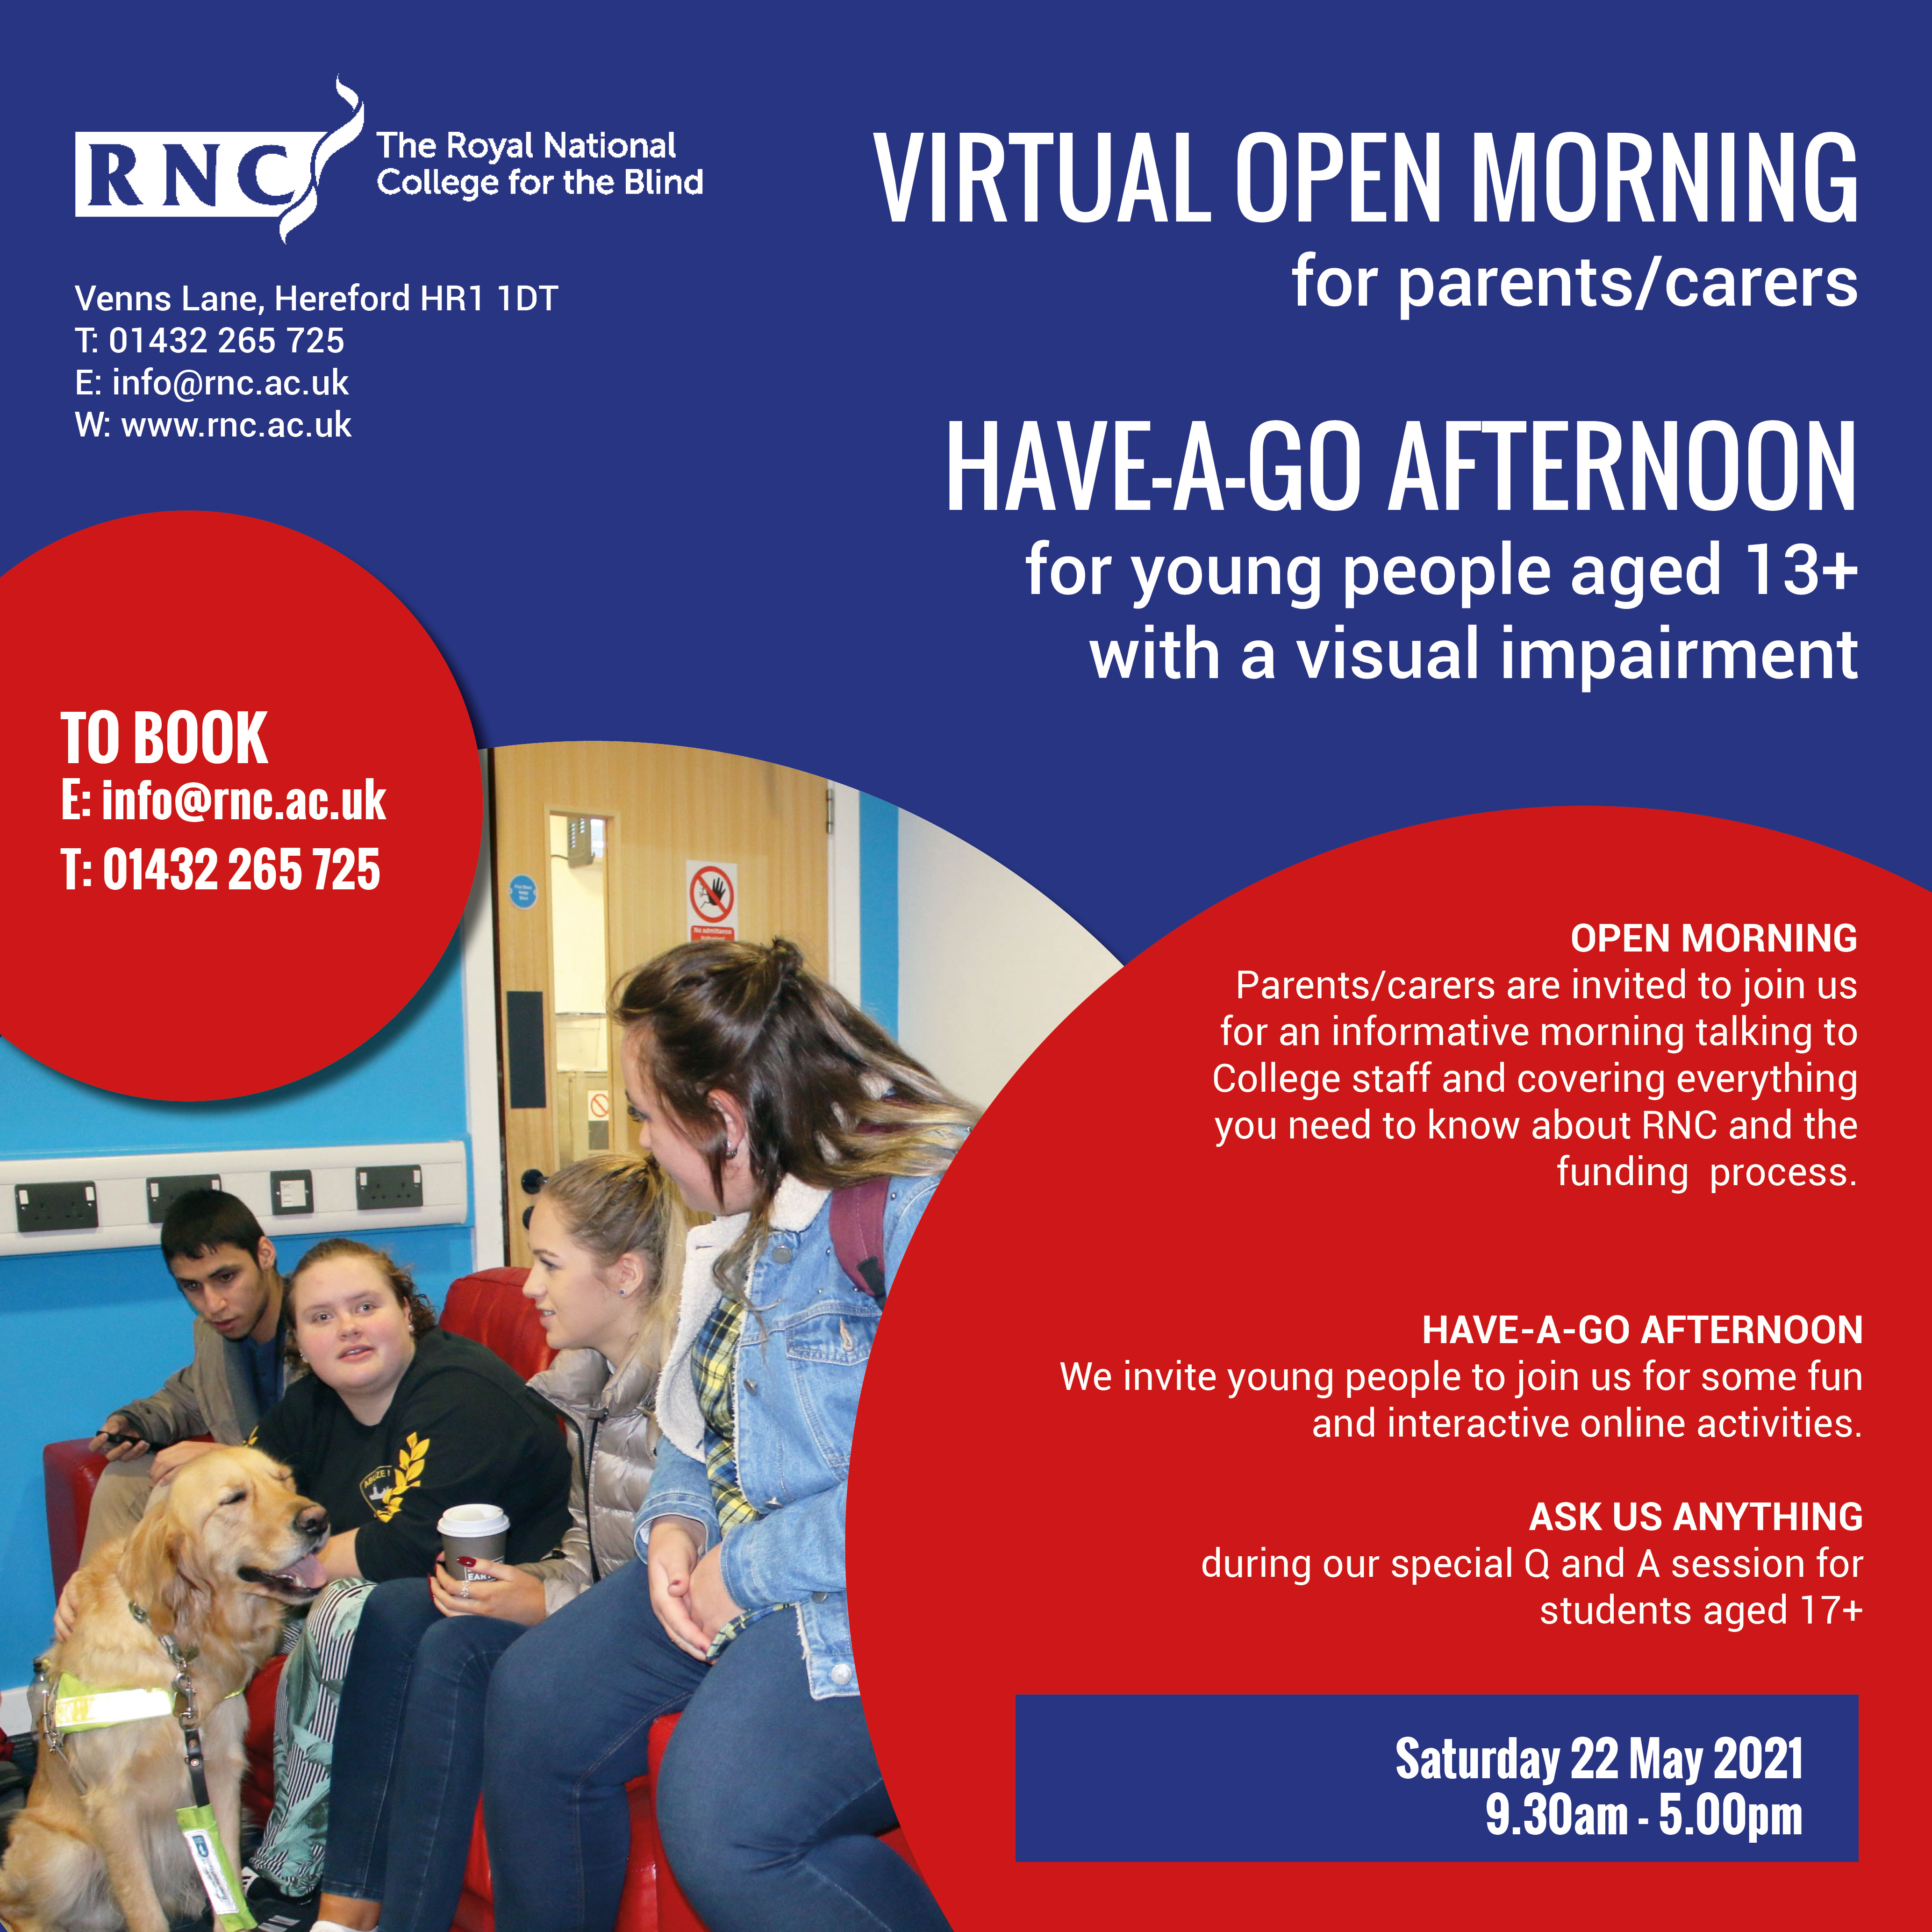 poster advertising open event with image of a group of students sitting on a red sofa chatting with a guide dog in the foreground